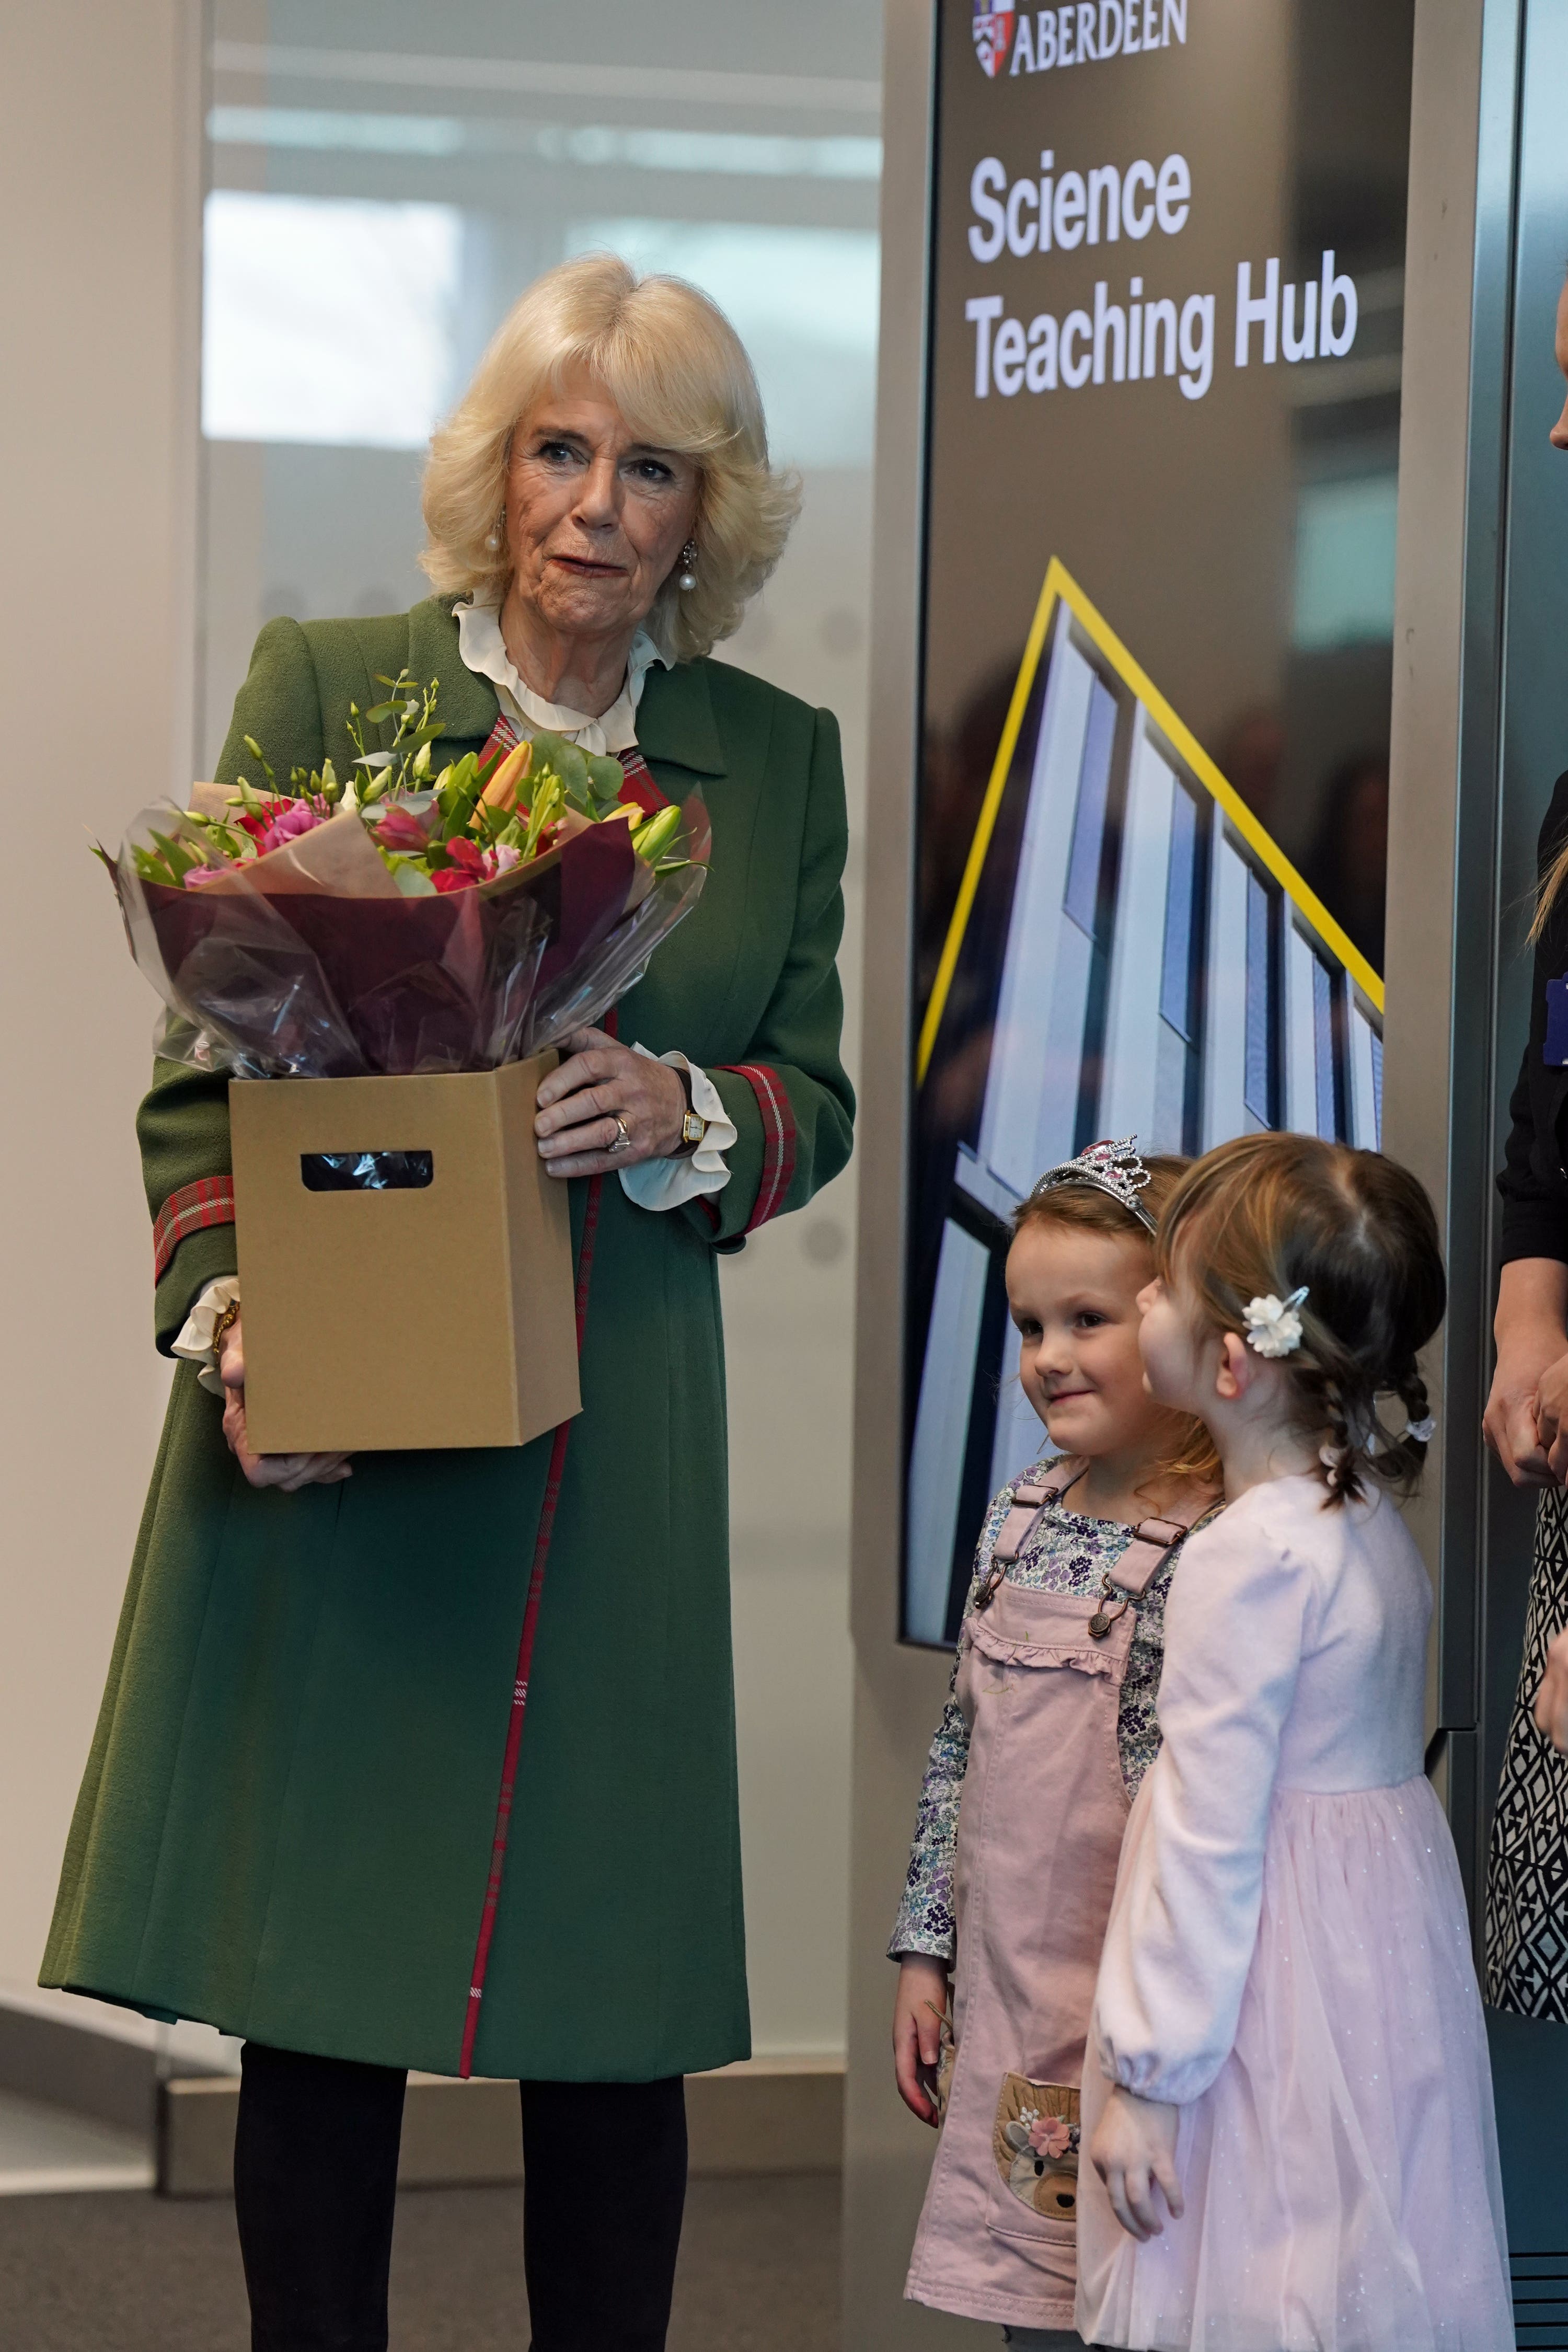 Camilla was presented with flowers by youngsters Elspeth Cameron, left, and Rosa Alexander.